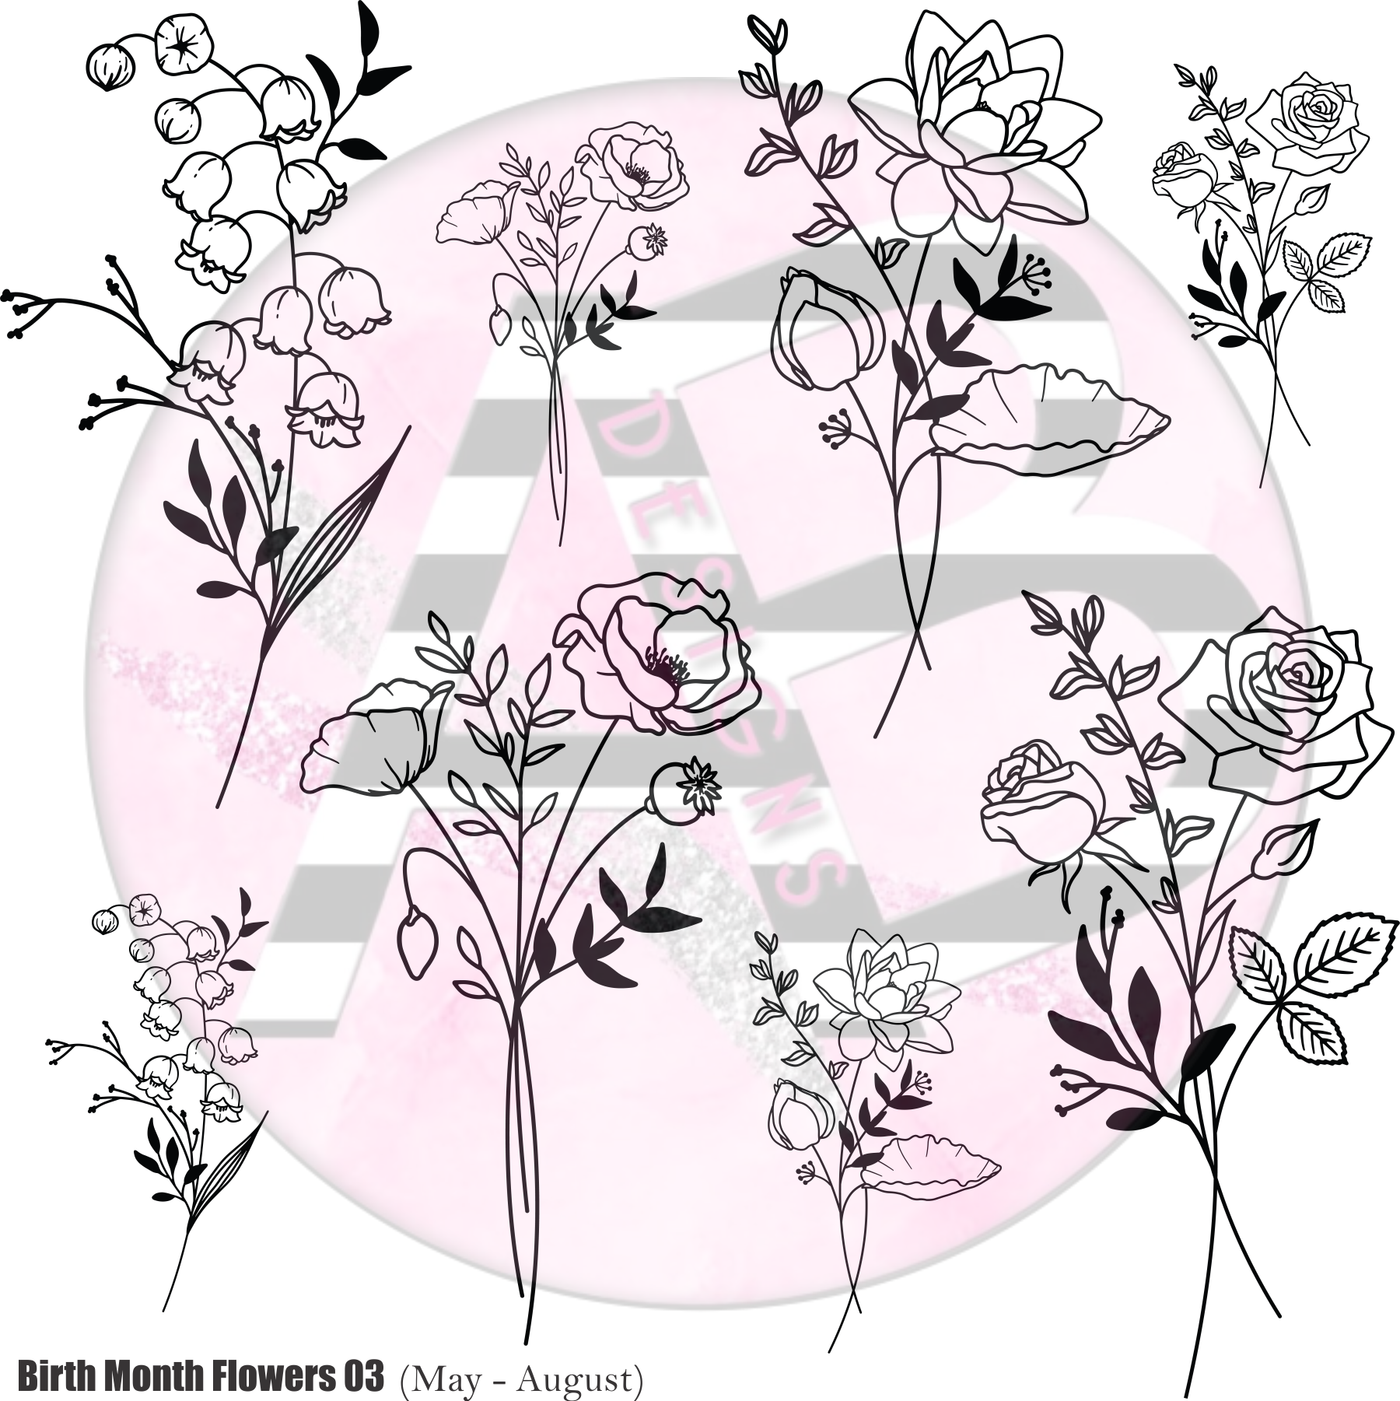 Birth Month Flowers 03 (May - August) Full Sheet 12 x 12 Clear Cast Decal